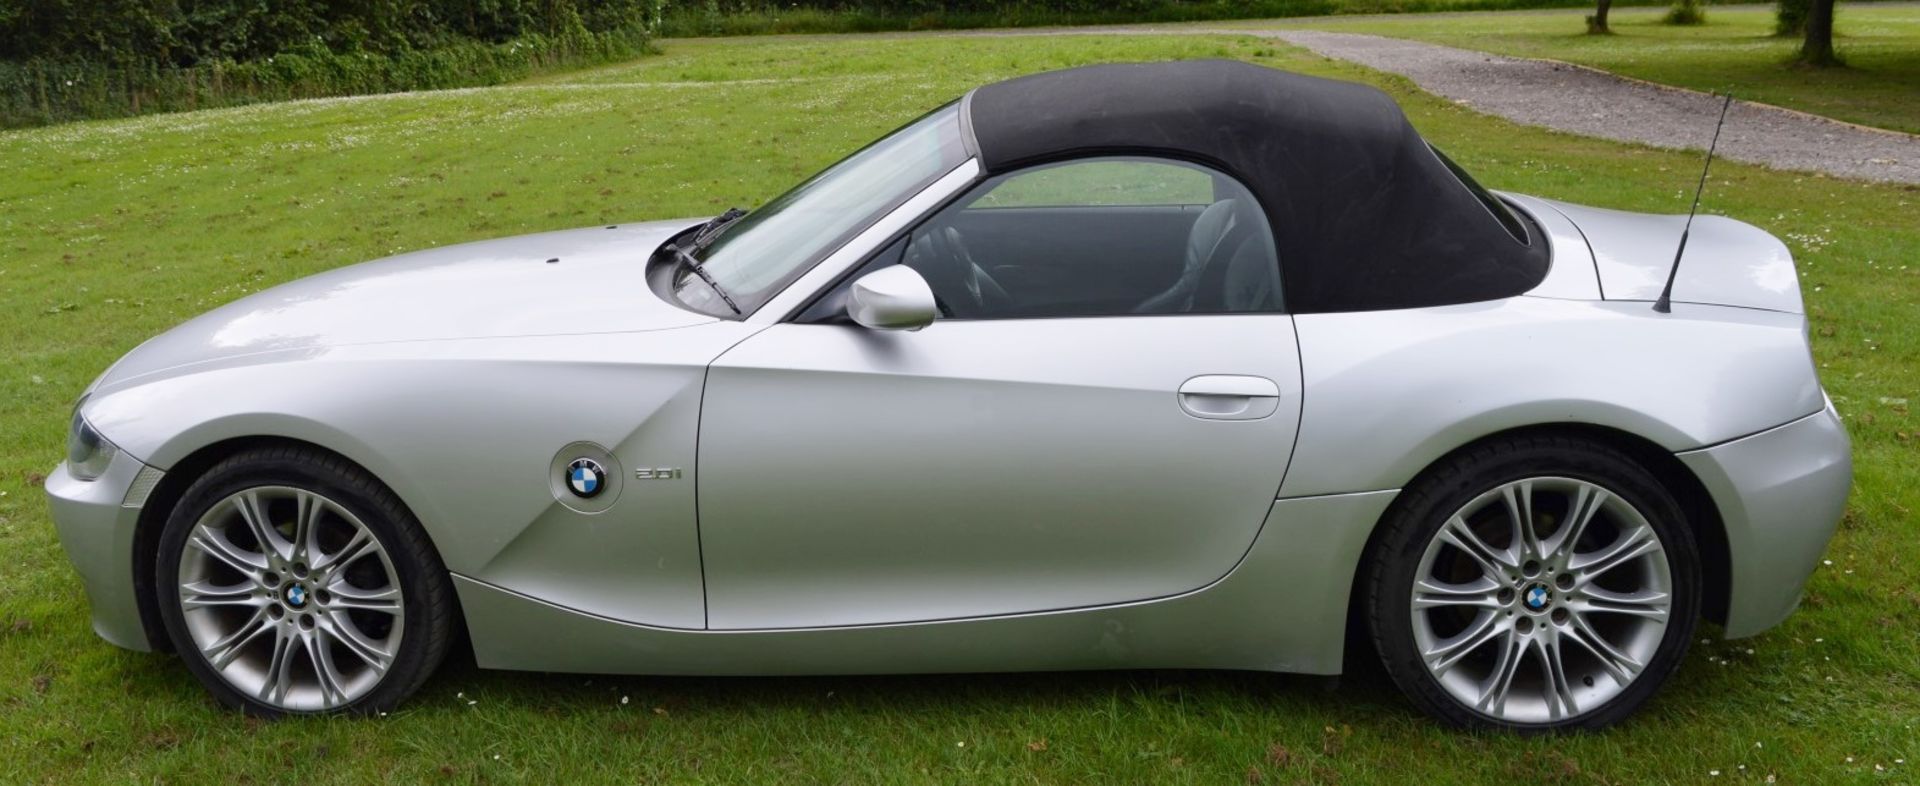 1 x BMW M Sport Convertible Z4 2.0i - 2008 58 Plate - 54,000 Miles - Silver Finish - Power Roof - - Image 7 of 47